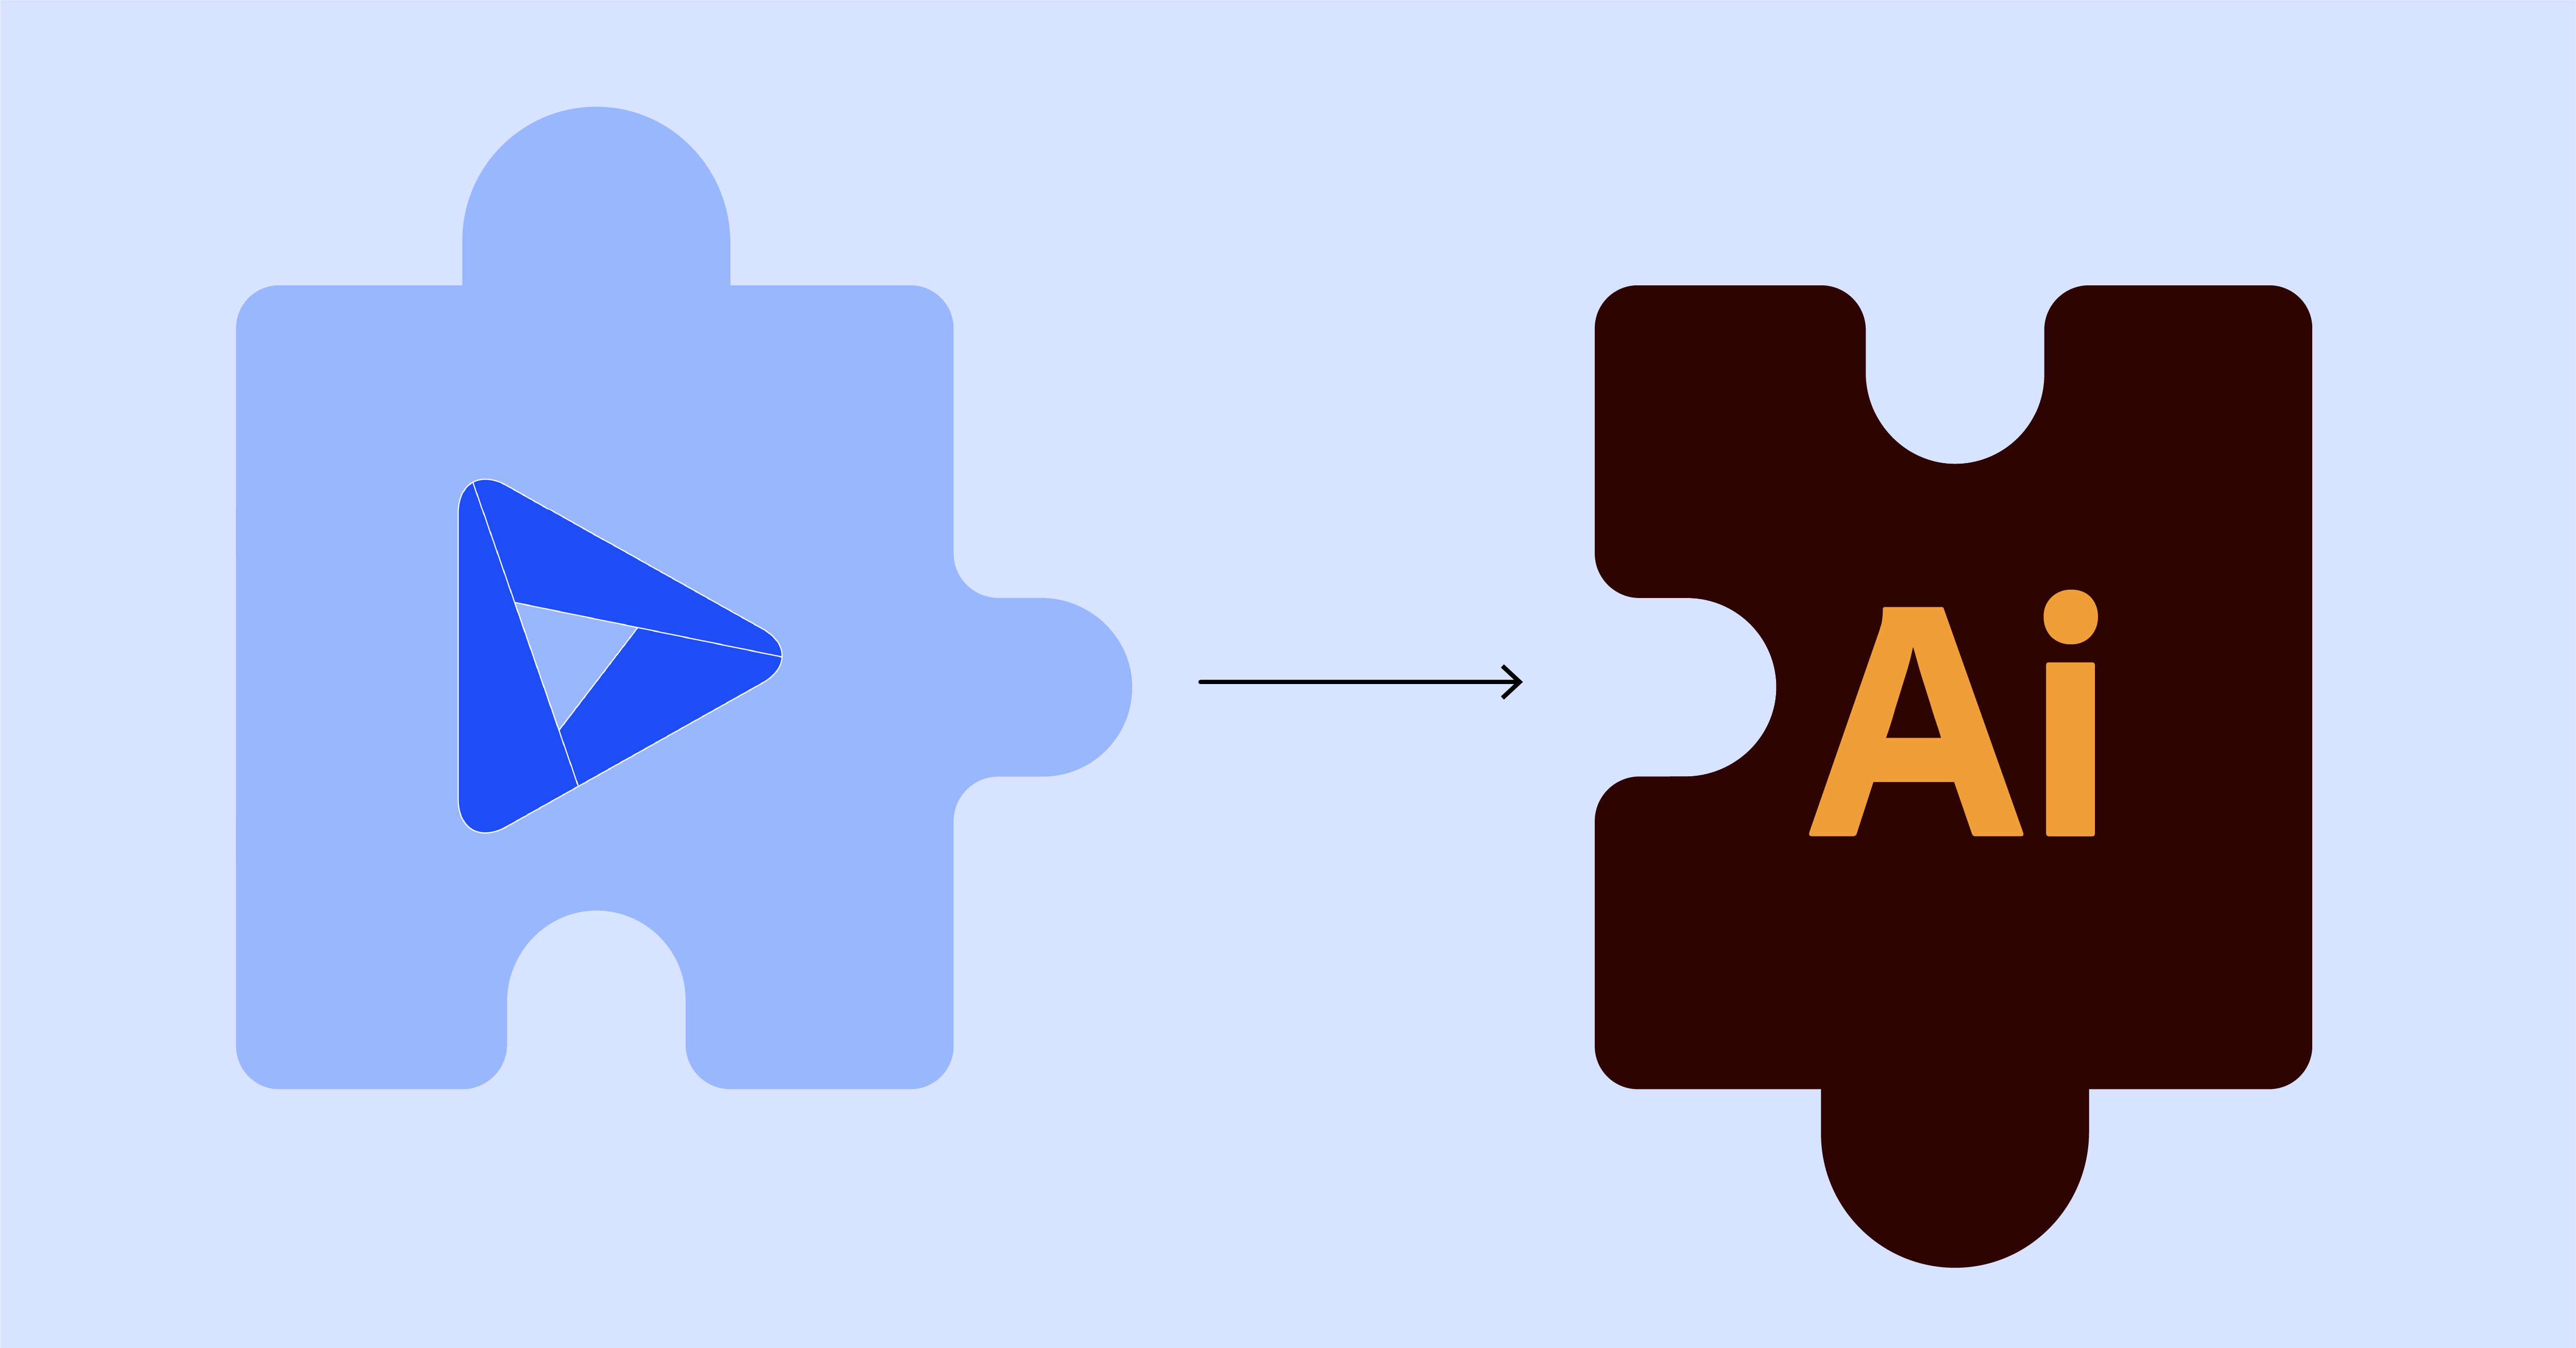 The image shows two puzzles that can be put together to represent compatibility. The left puzzle is blue and has a Datylon logo on it. The right puzzle is dark brown and has the Adobe Illustrator logo on it.